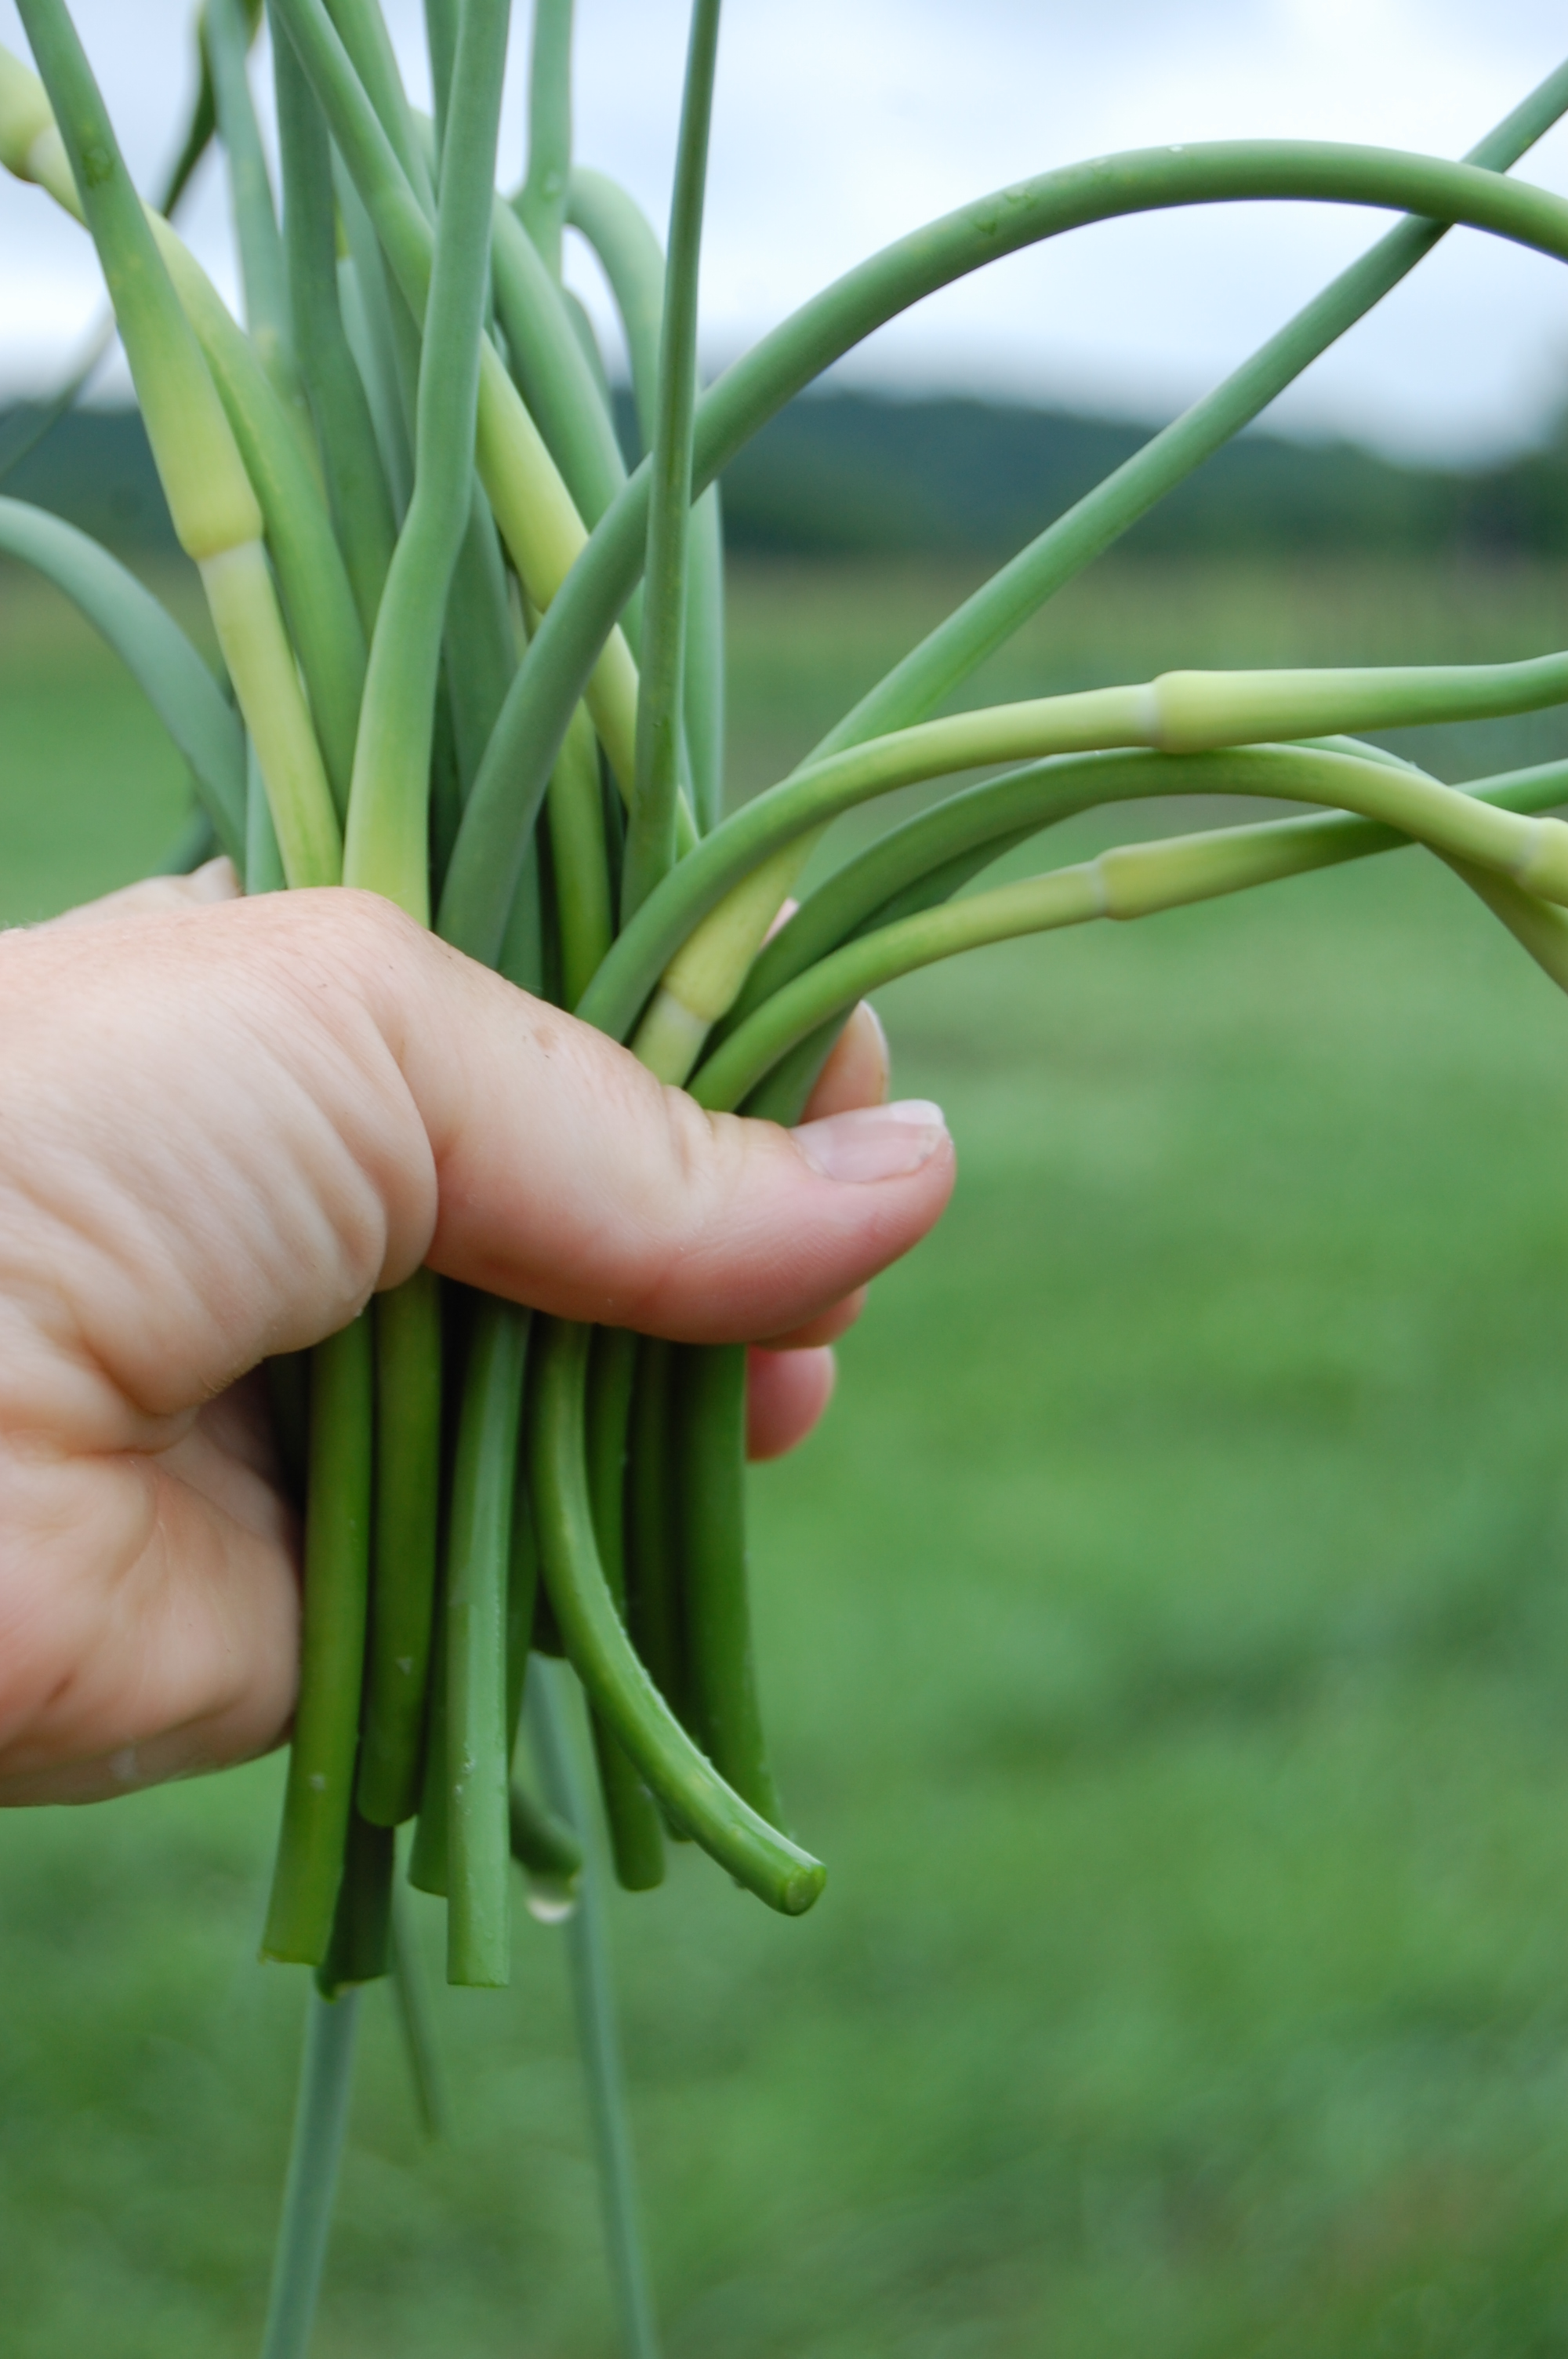   Garlic scapes are delicious in soups and stir fries, roasted, pickled, or turned into pesto.   
  
 Normal 
 0 
 
 
 
 
 false 
 false 
 false 
 
 EN-US 
 X-NONE 
 X-NONE 
 
  
  
  
  
  
  
  
  
  
 
 
  
  
  
  
  
  
  
  
  
  
  
  
    
  